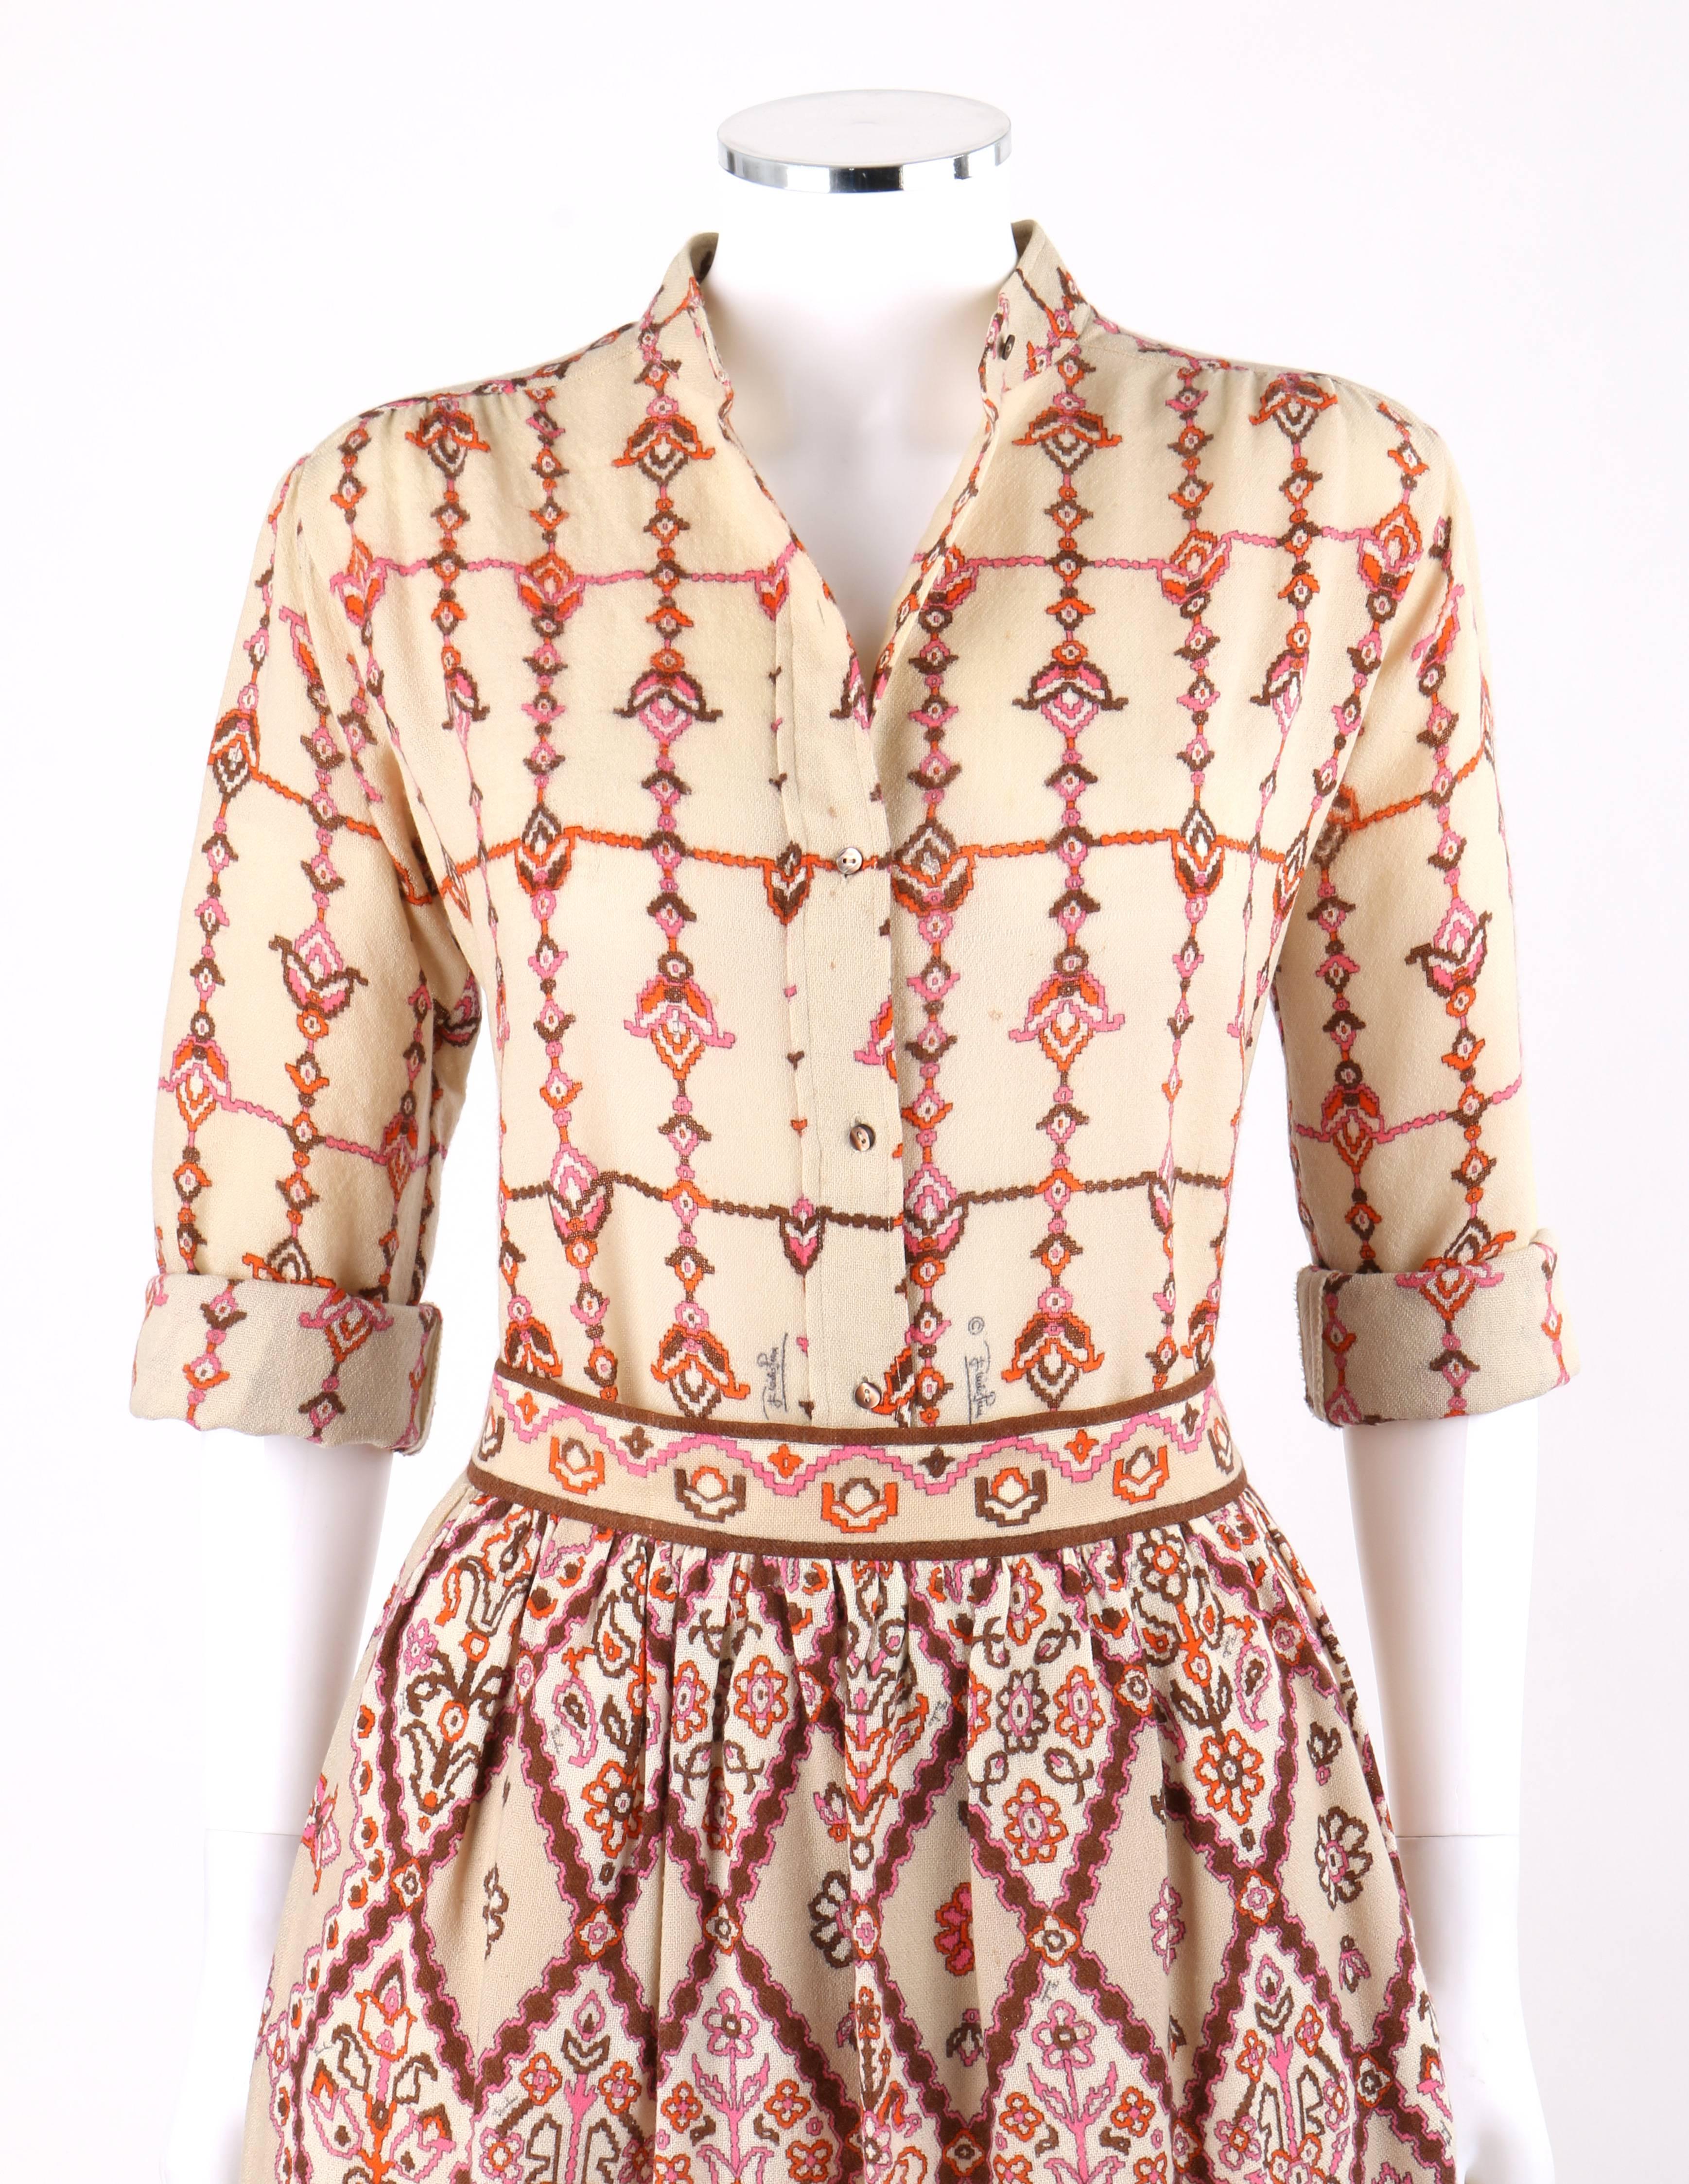 Emilio Pucci Signature Print Shirt Blouse Gathered Skirt Dress Set, circa 1950s In Good Condition For Sale In Thiensville, WI